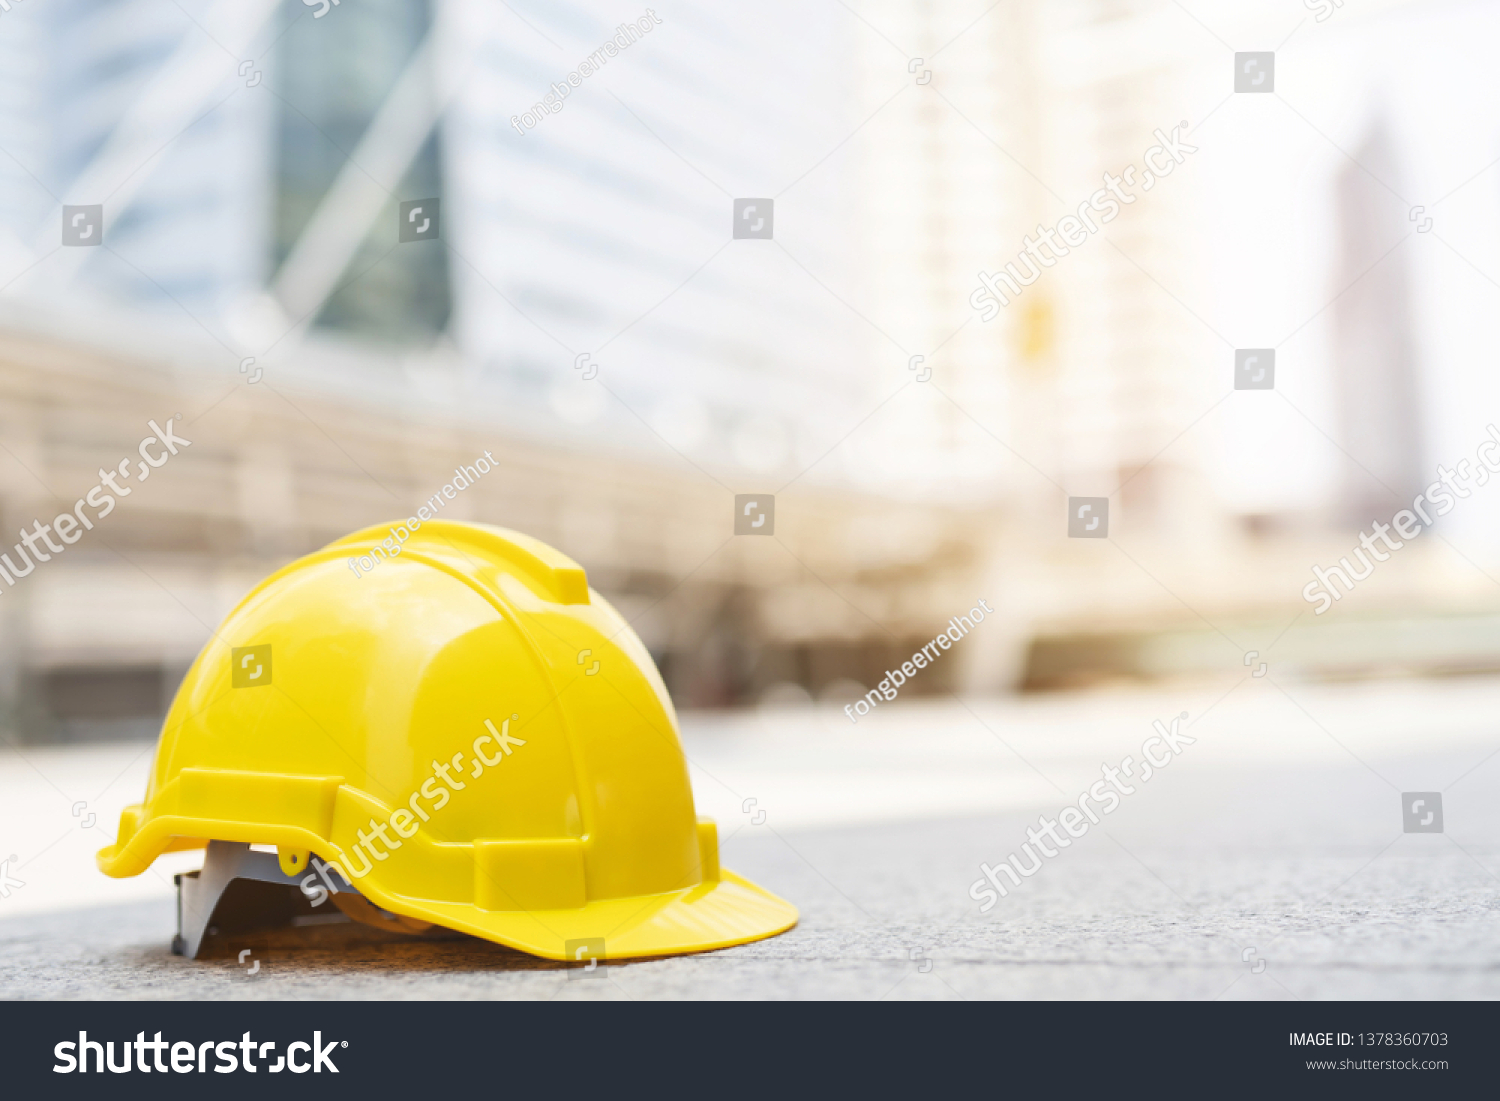 yellow hard safety wear helmet hat in the project at construction site building on concrete floor on city with sunlight. helmet for workman as engineer or worker. concept safety first.  #1378360703